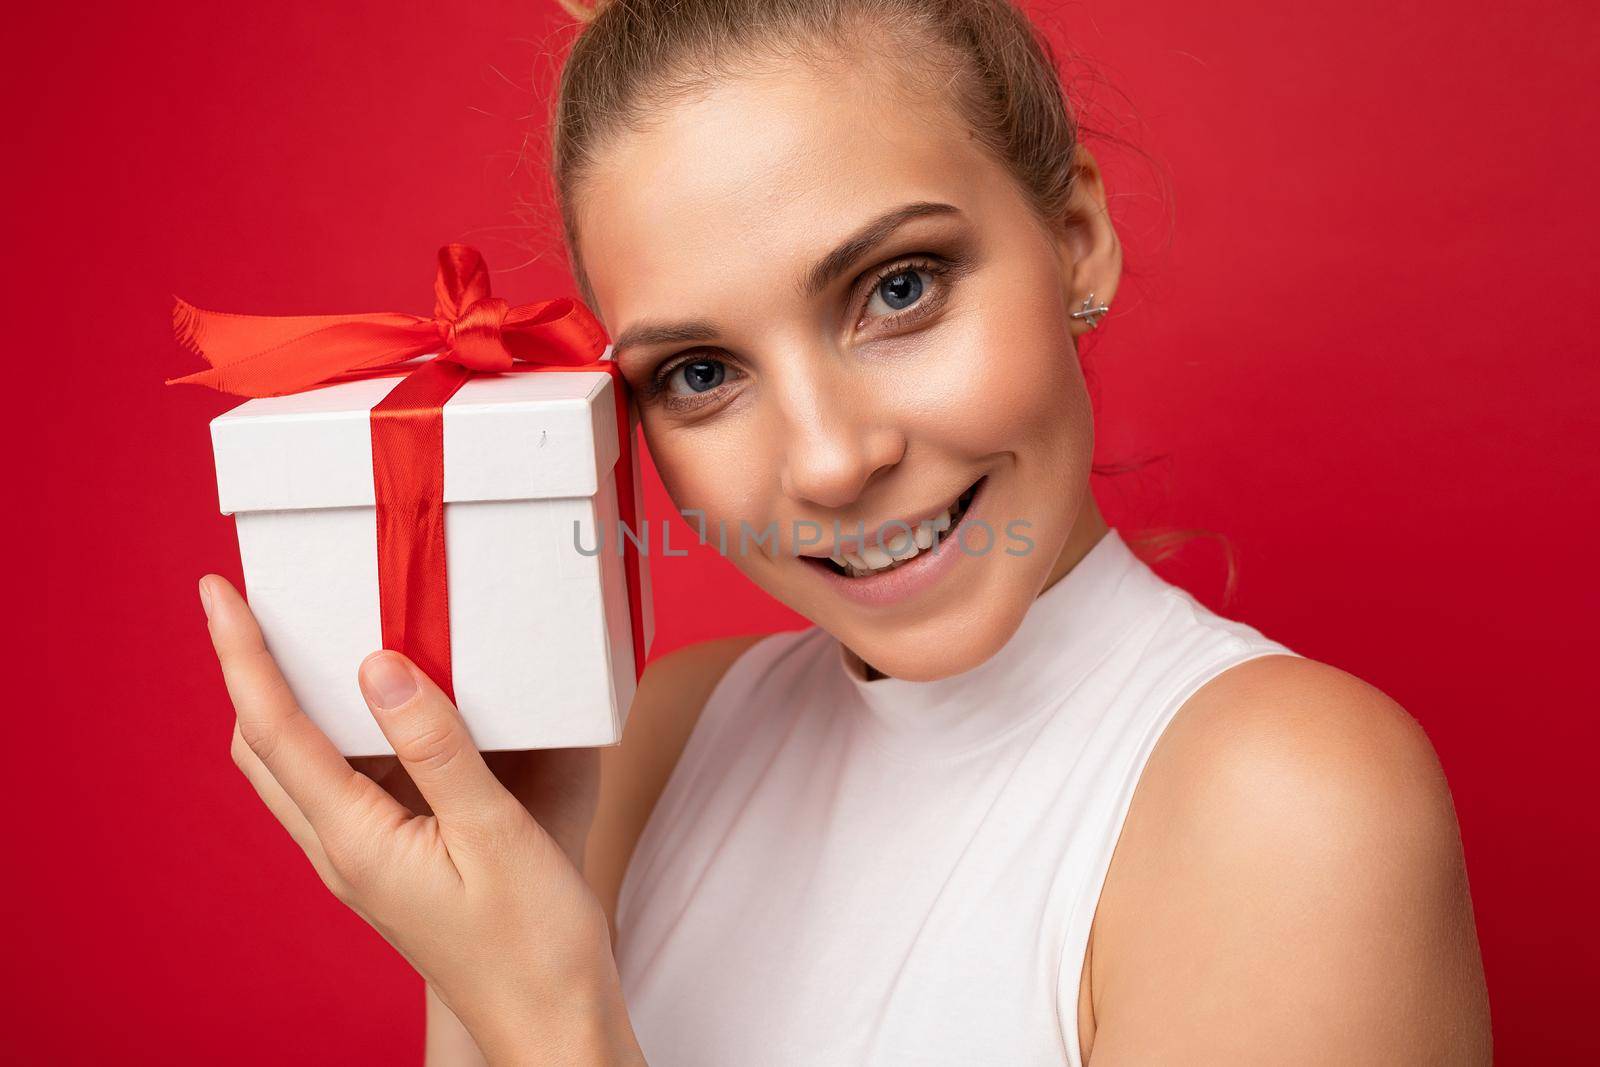 Closeup shot of attractive positive smiling young blonde woman isolated over colourful background wall wearing everyday trendy outfit holding gift box and looking at camera.